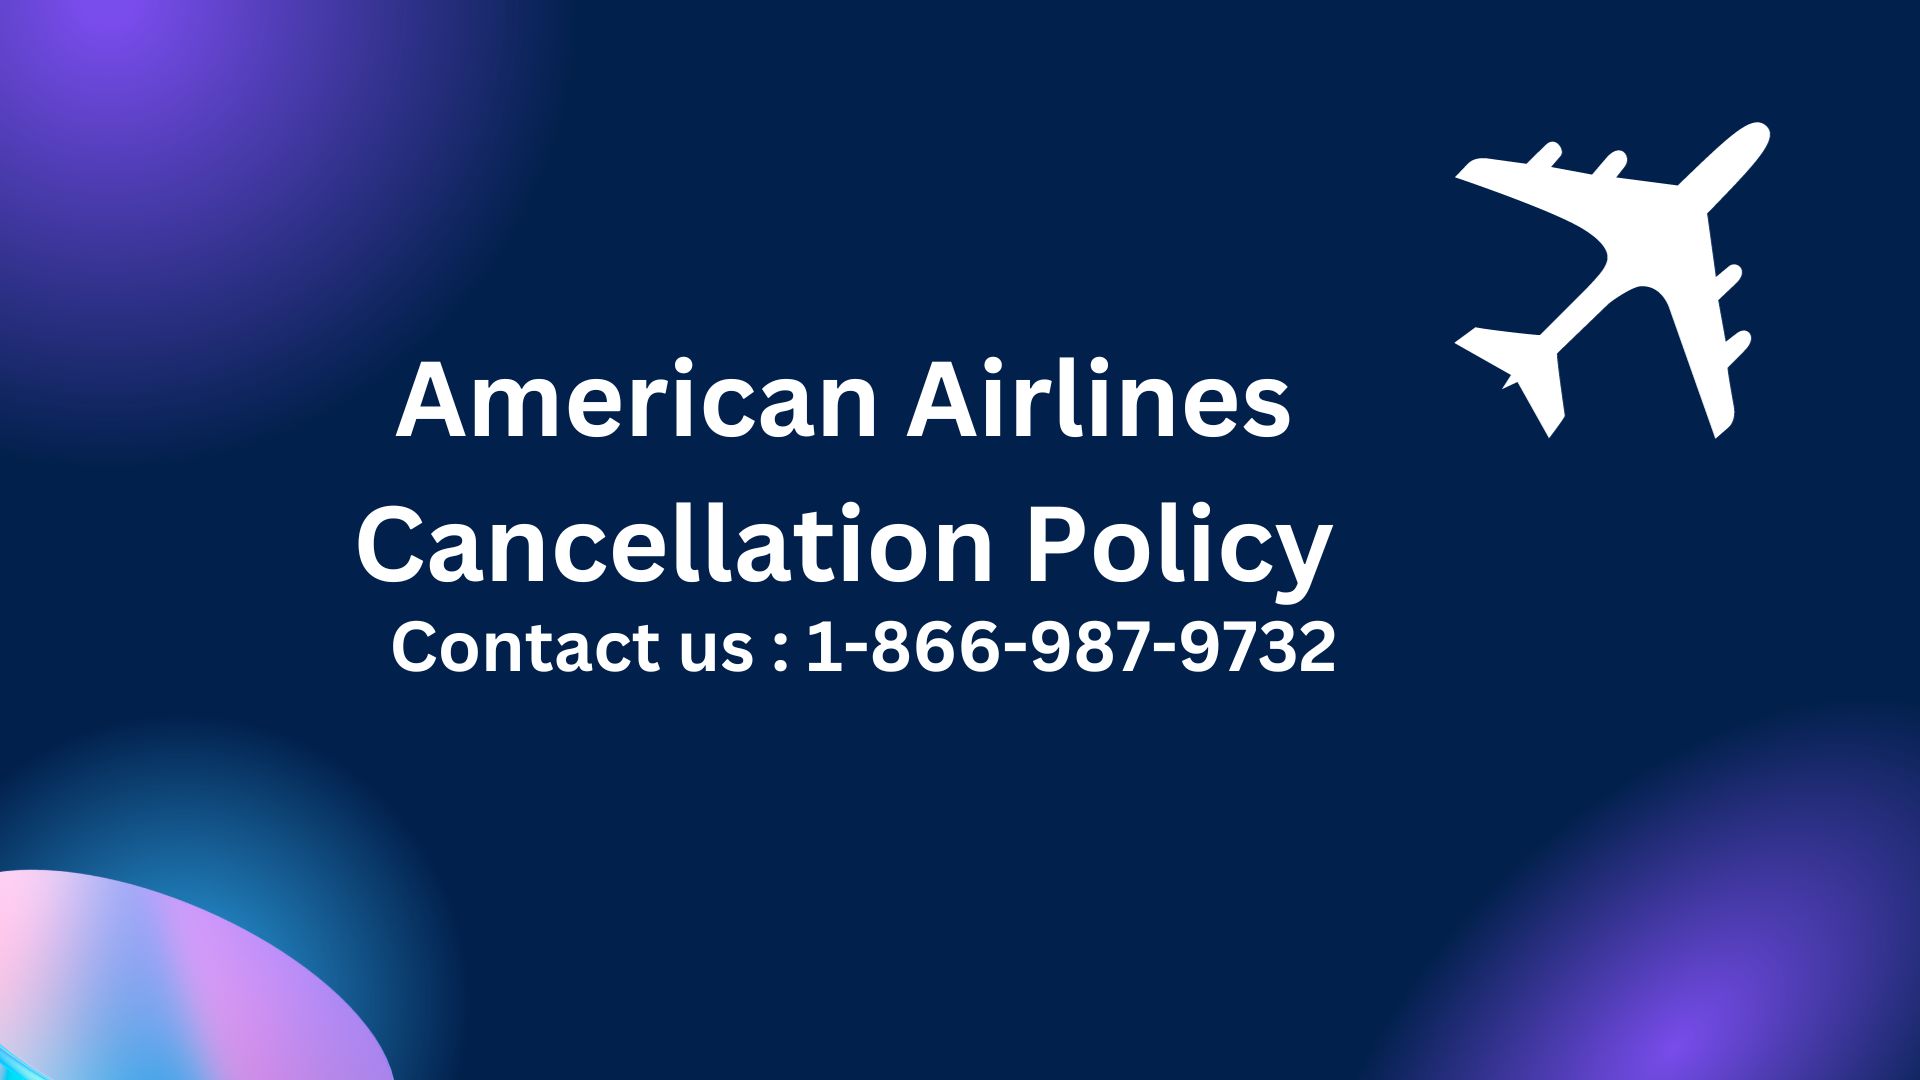 American Airlines Cancellation Policy, Refund Policy